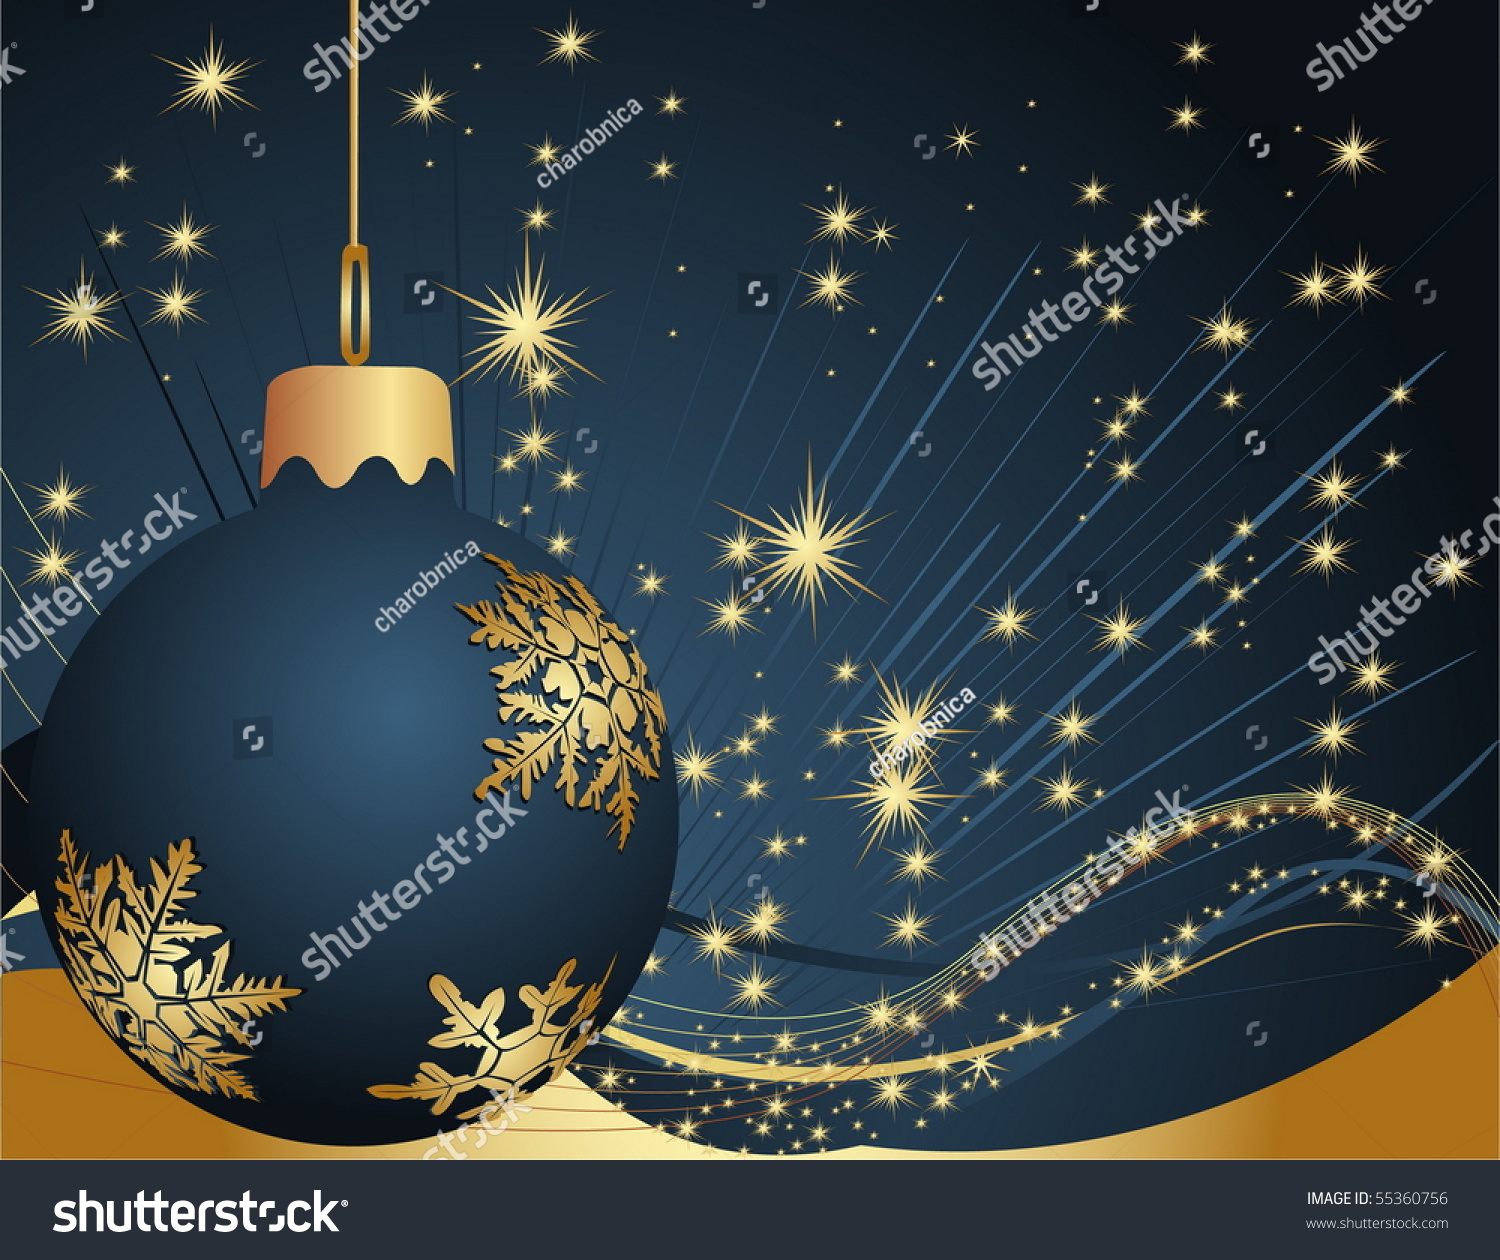 Happy New Year Background Stock Vector Illustration 55360756 : Shutterstock